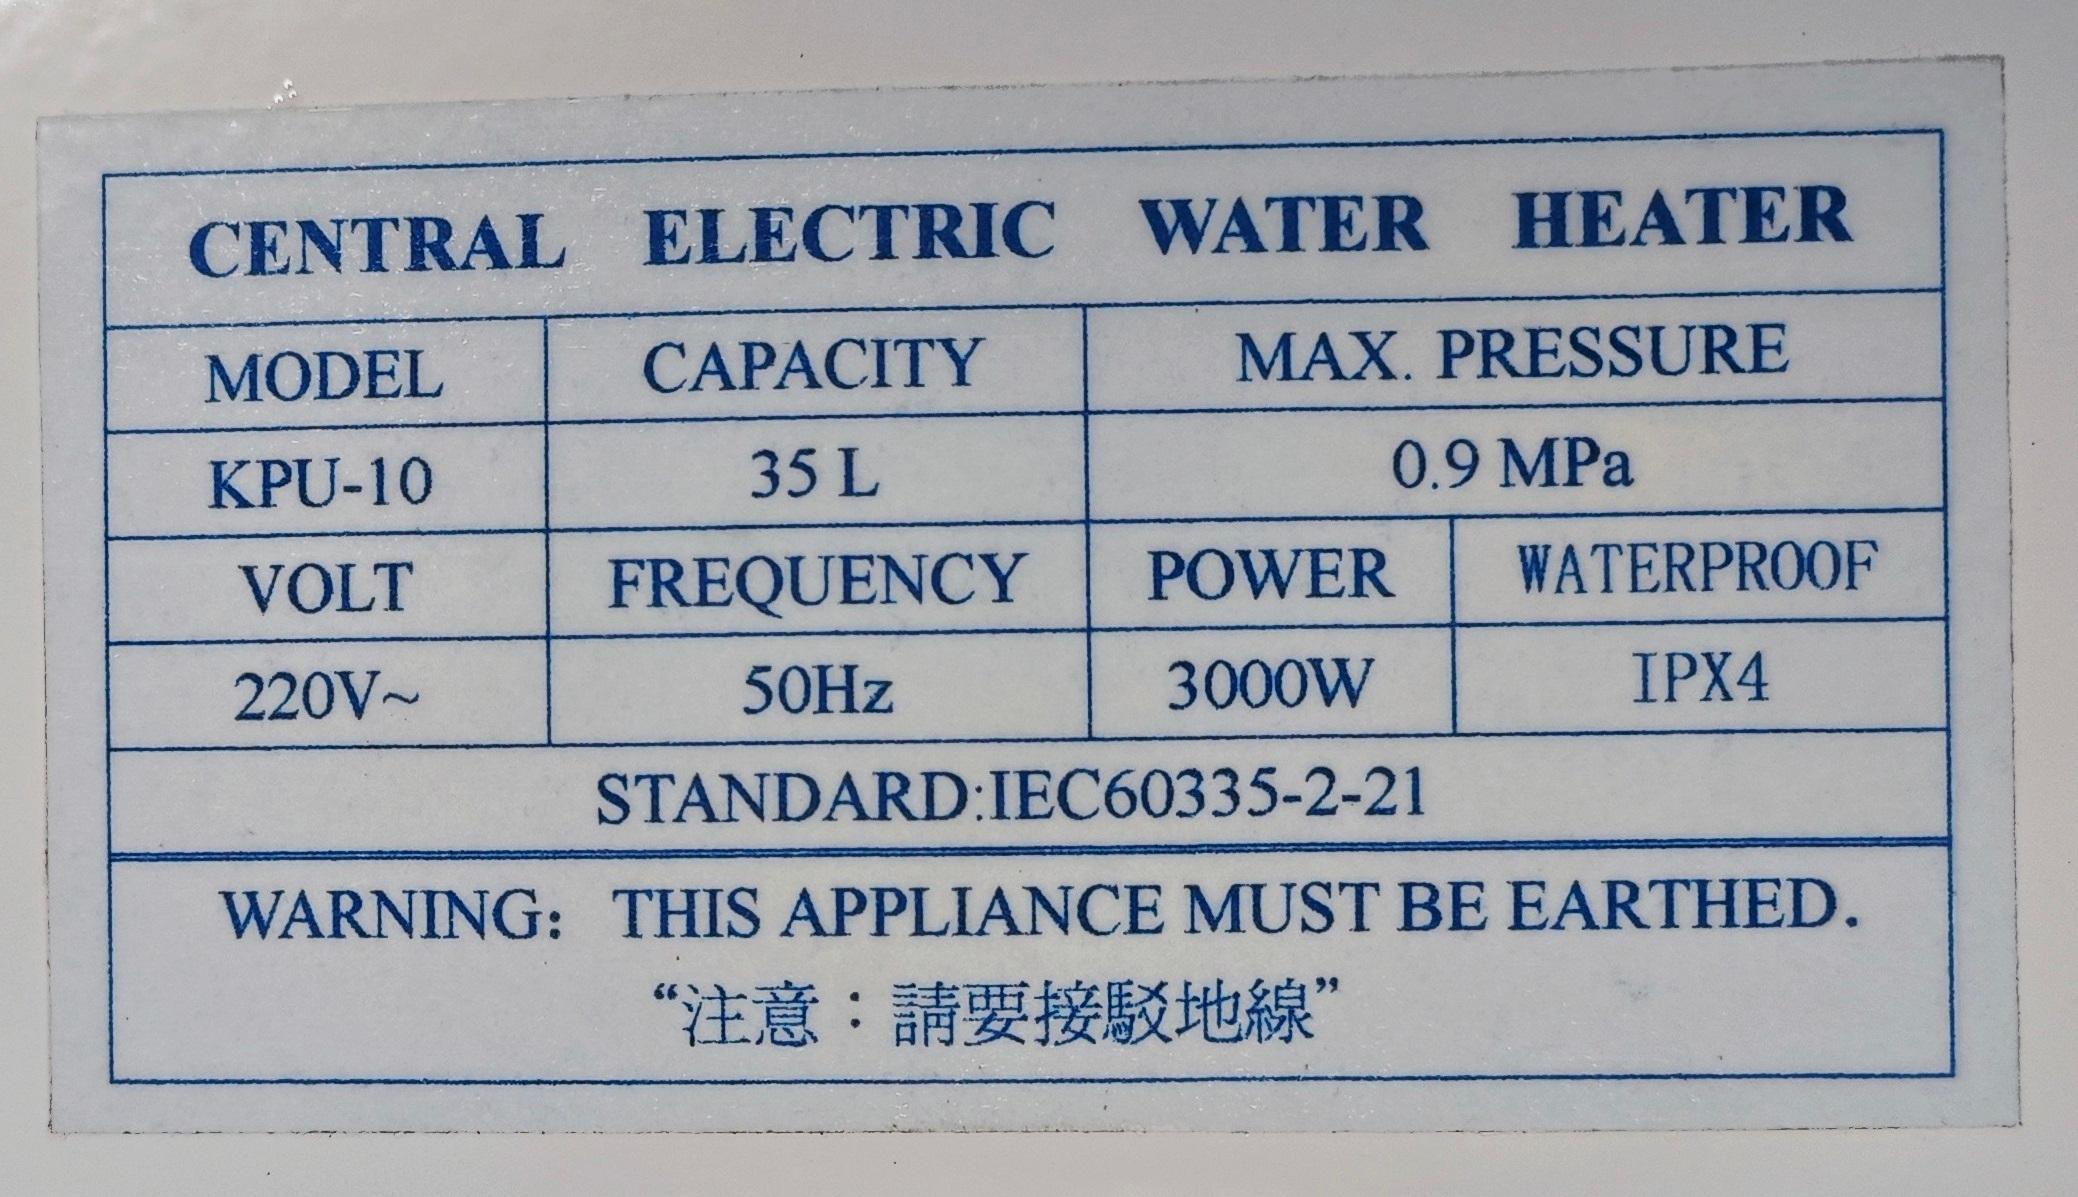 The Electrical and Mechanical Services Department today (January 11) removed one storage type electric water heater model from the record of listed models under the Energy Efficiency (Labelling of Products) Ordinance. Photo shows the product label on the storage type electric water heater model.